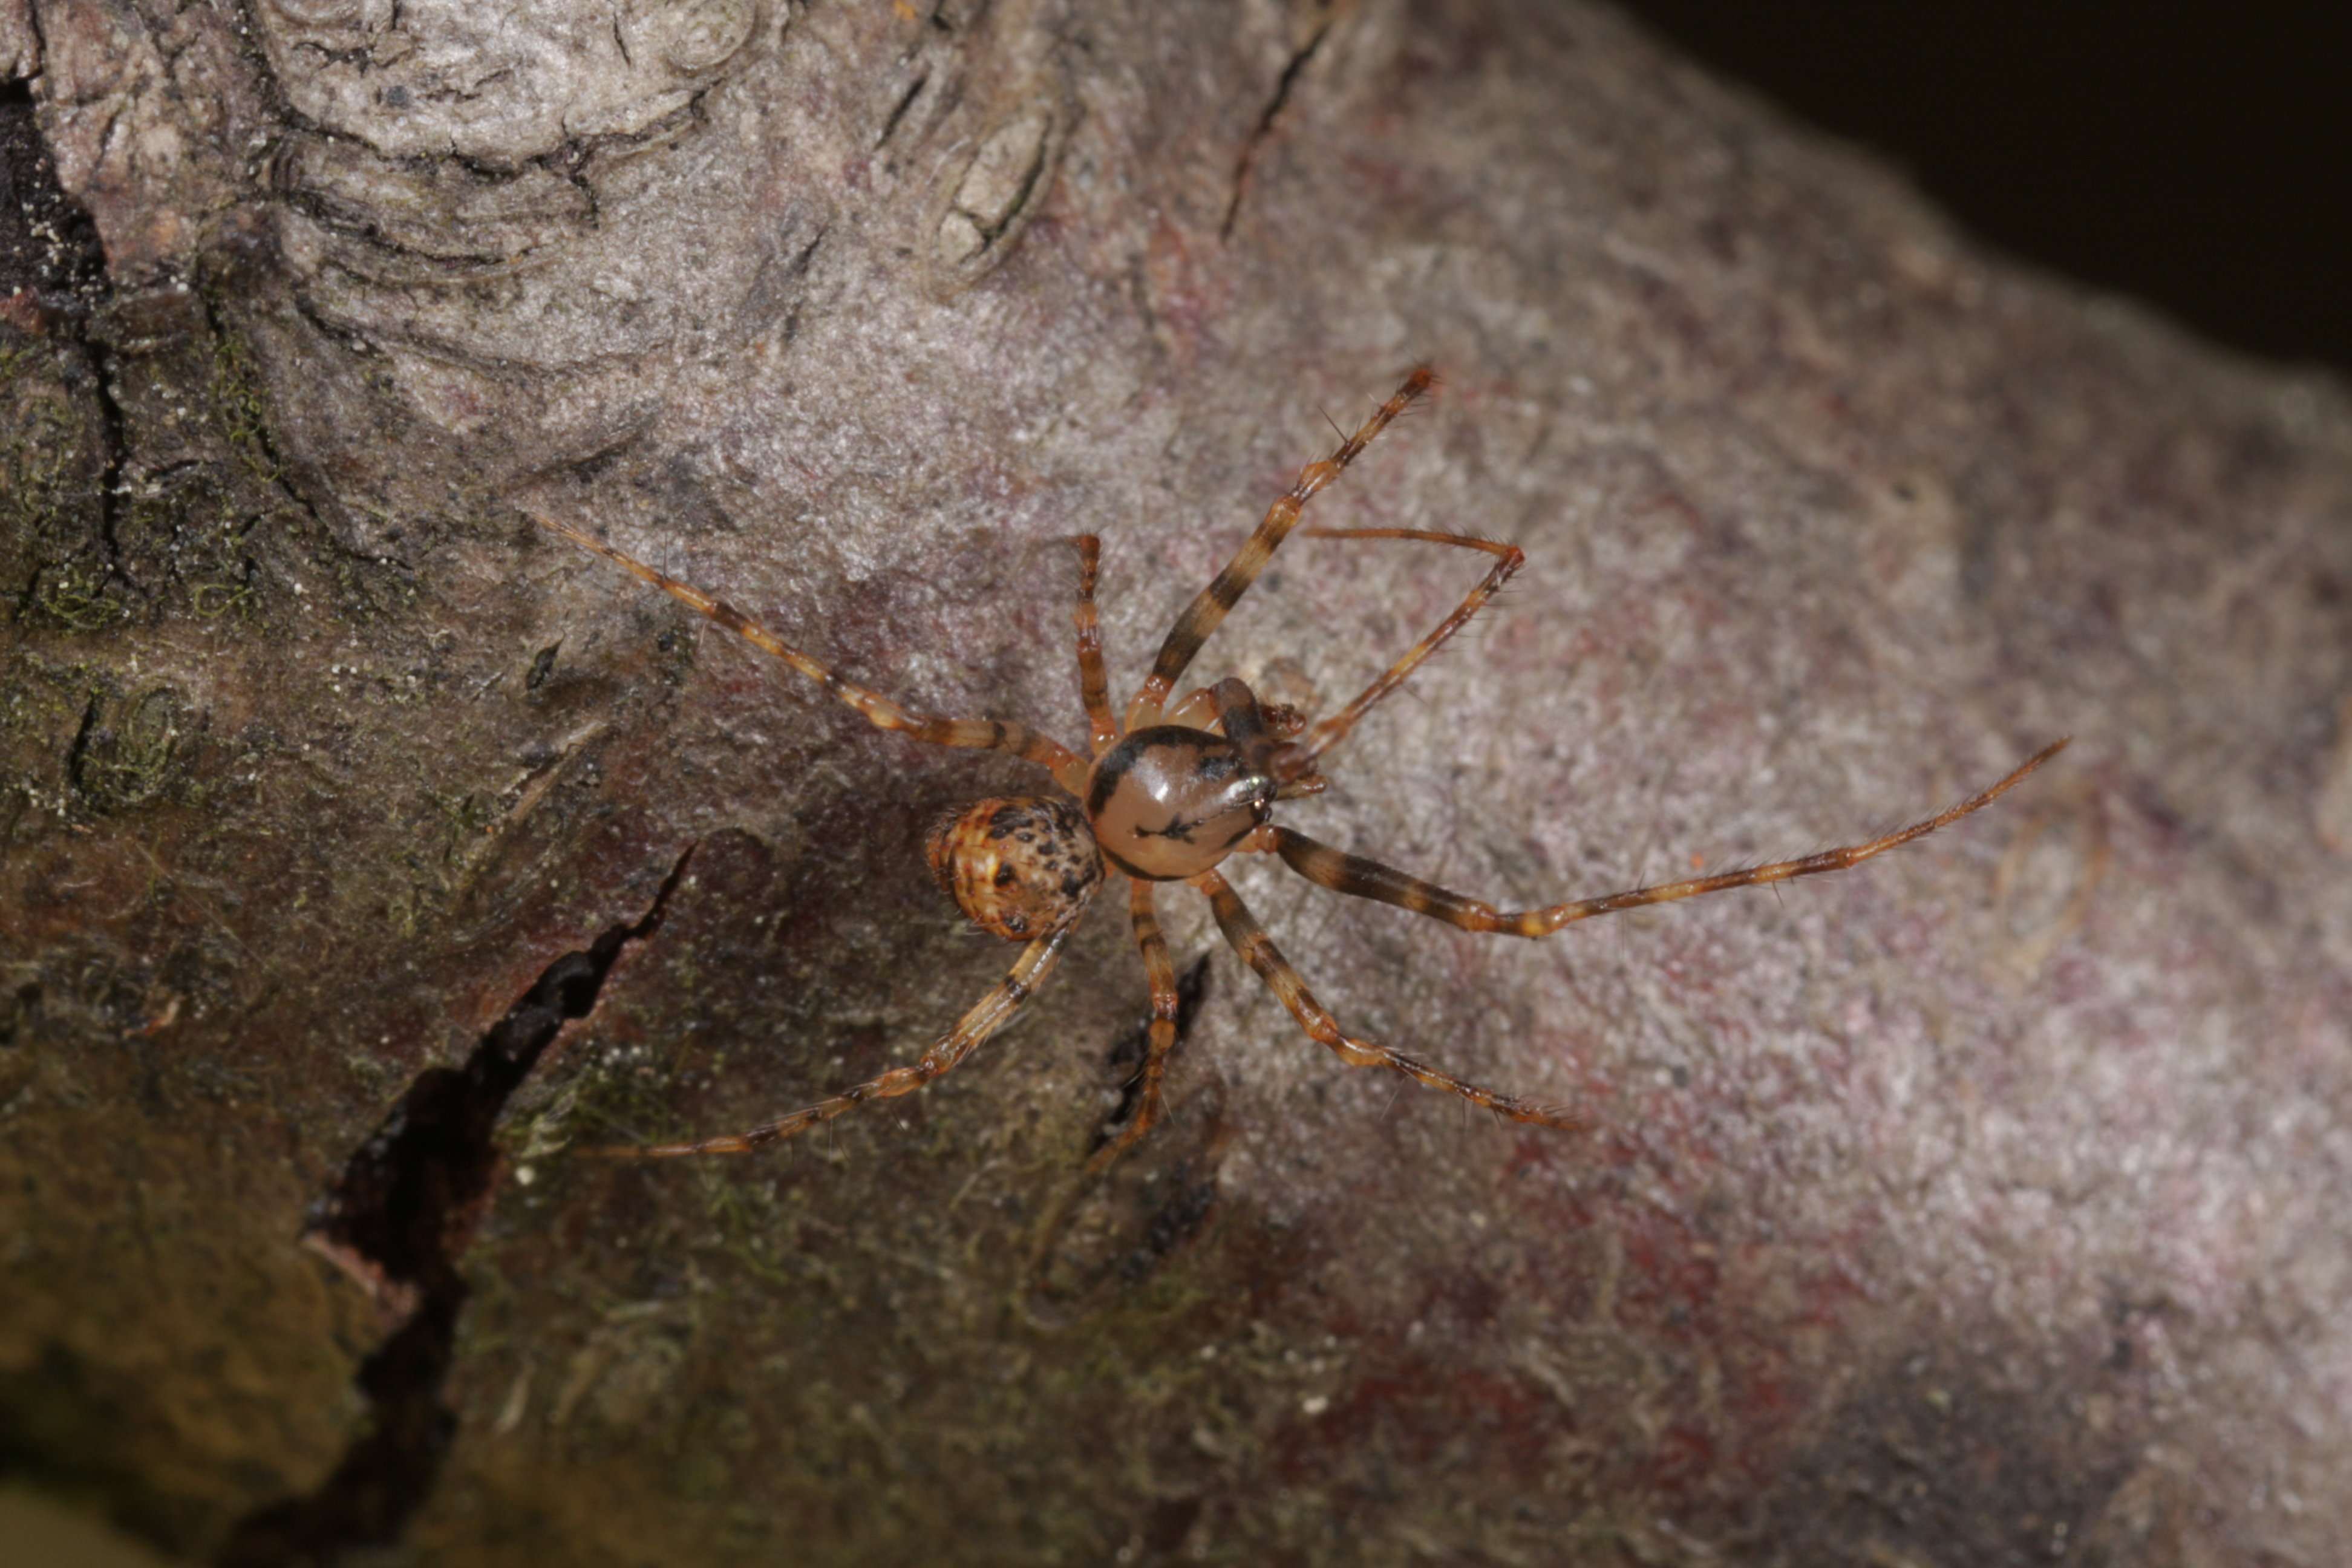 Male pirate spider (Photo: G. Loos)